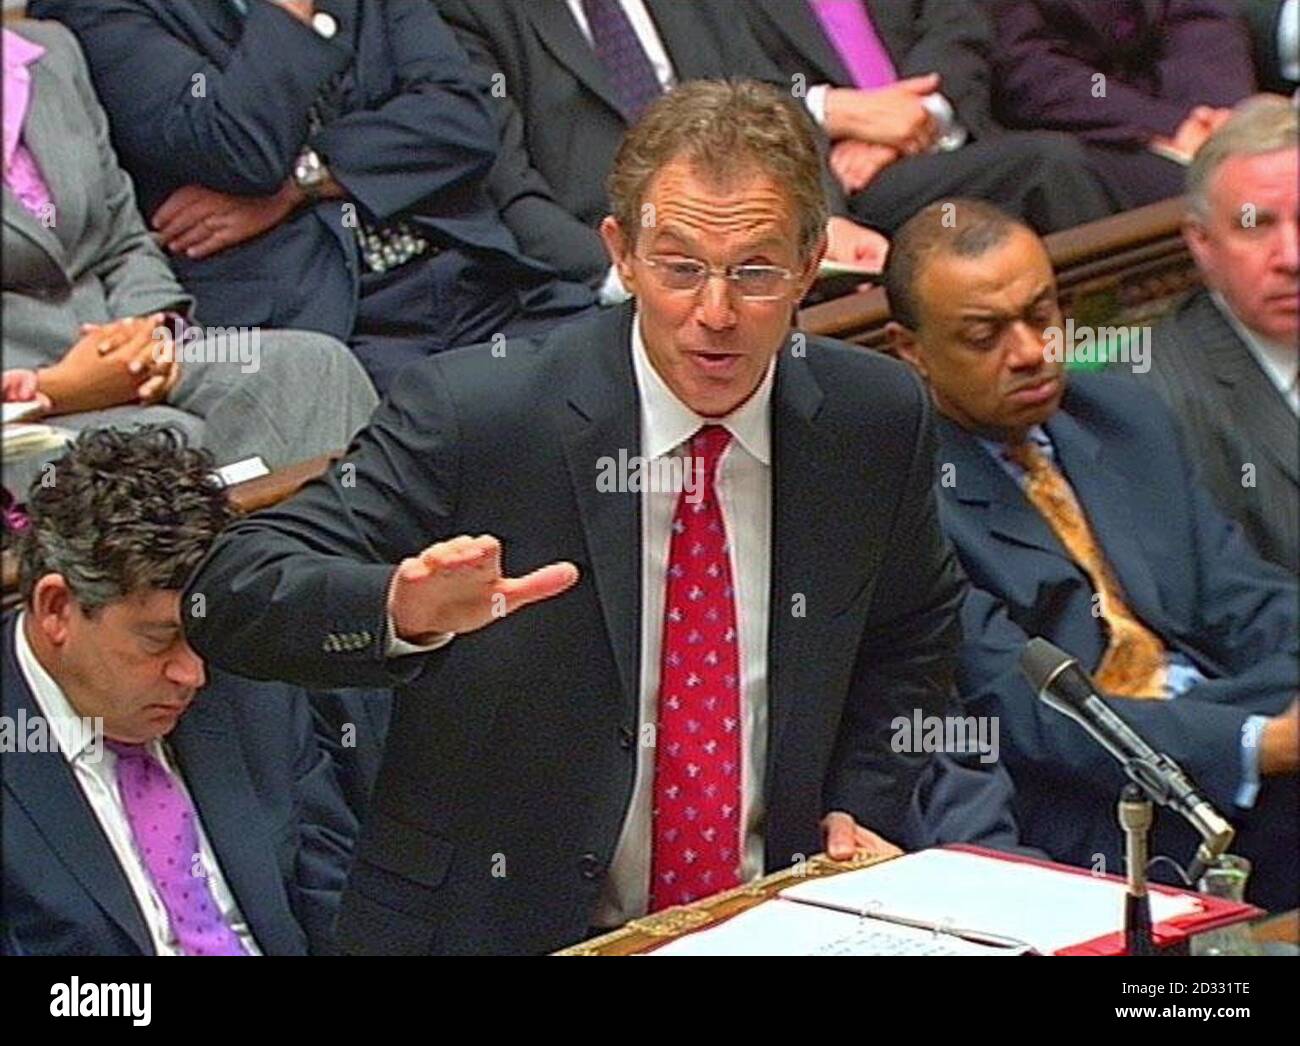 Prime Minister Tony Blair answers a question in the House of Commons during his regular weekly session of questions from members of parliament. * Amongst other matters, he was expected to be quizzed over allegations that the Government exaggerated the threat of Iraq's weapons of mass destruction. Stock Photo